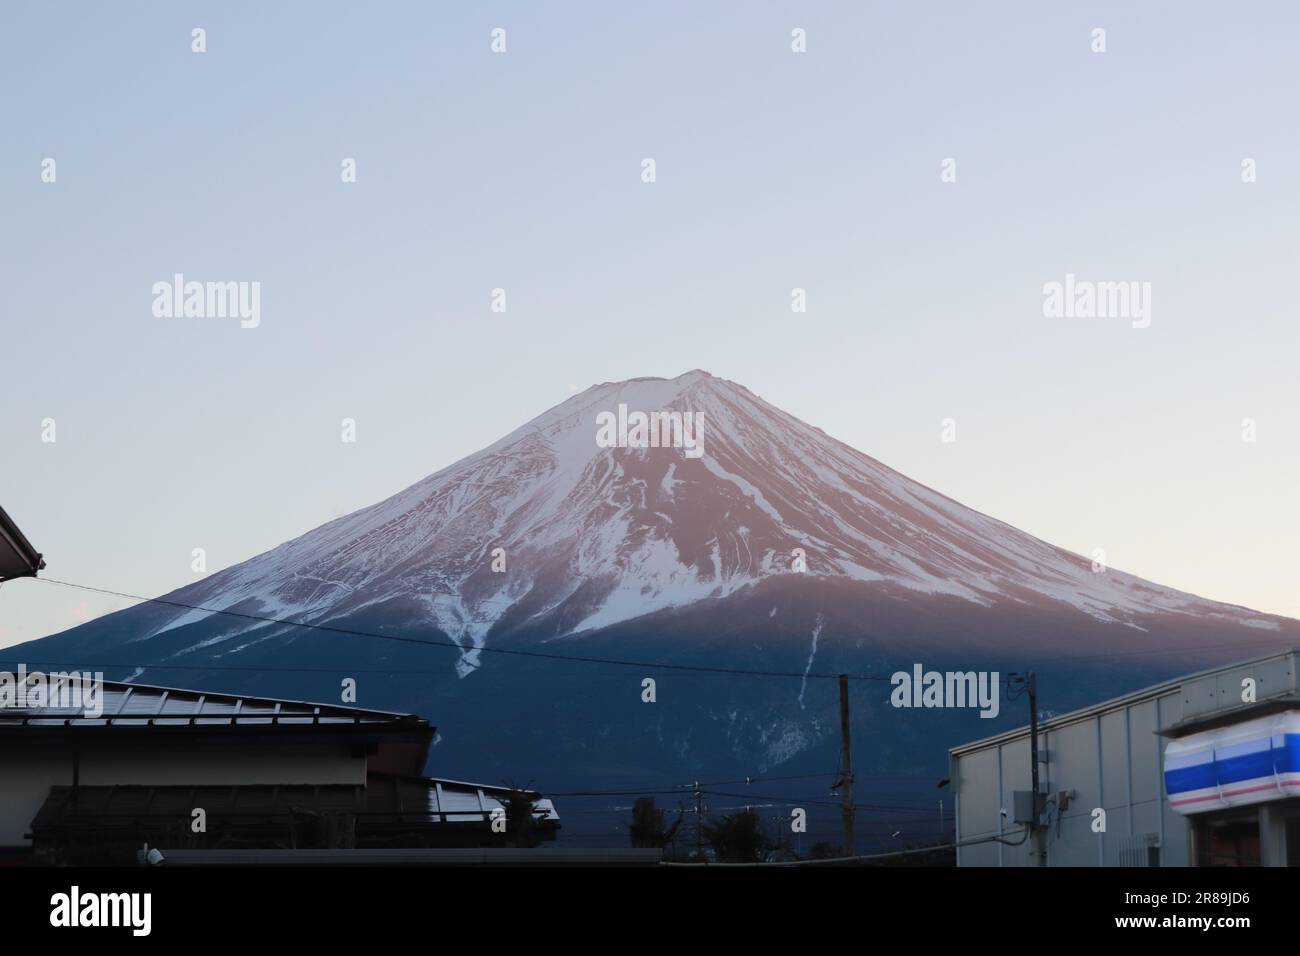 An areal view of the Fuji mountain rising above a skyline of buildings in the background Stock Photo